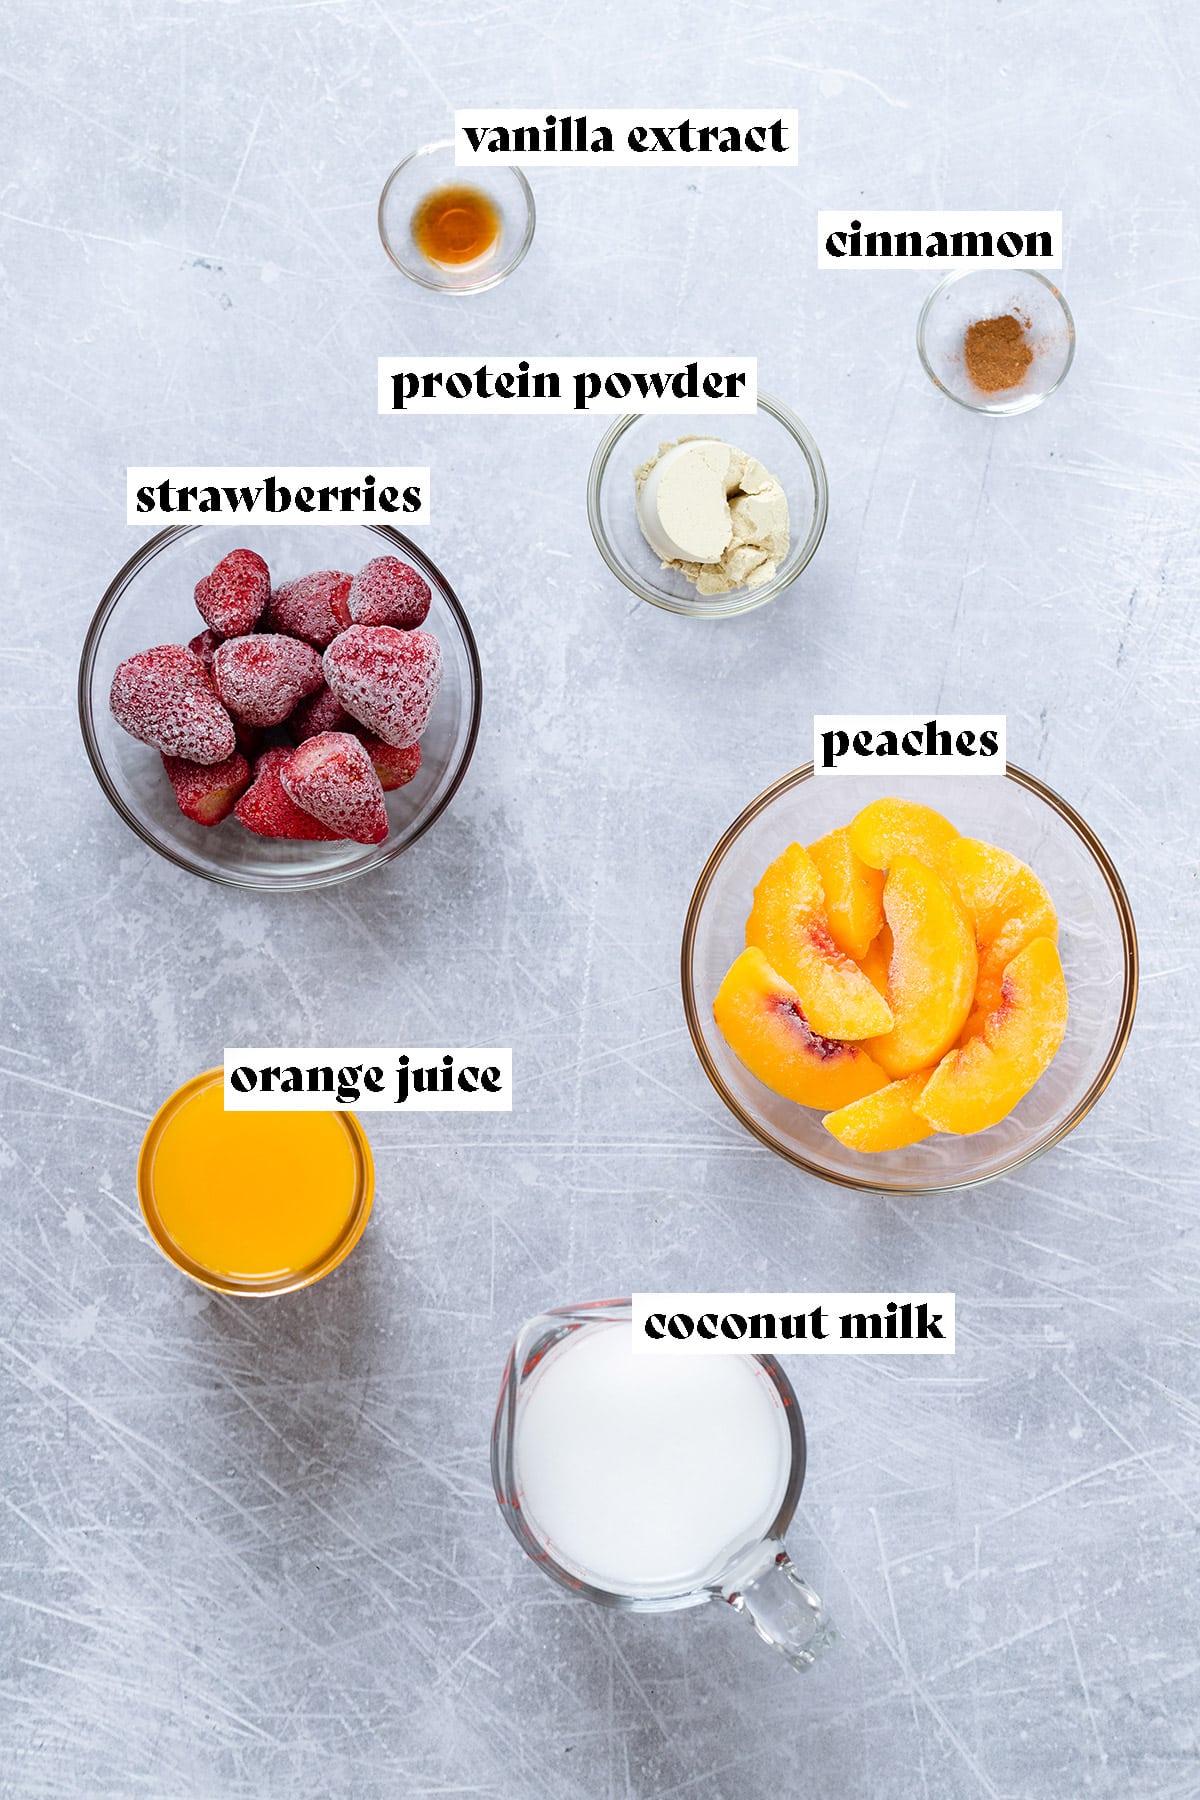 Ingredients for strawberry smoothie like frozen strawberries and peaches all laid out on a metal background.